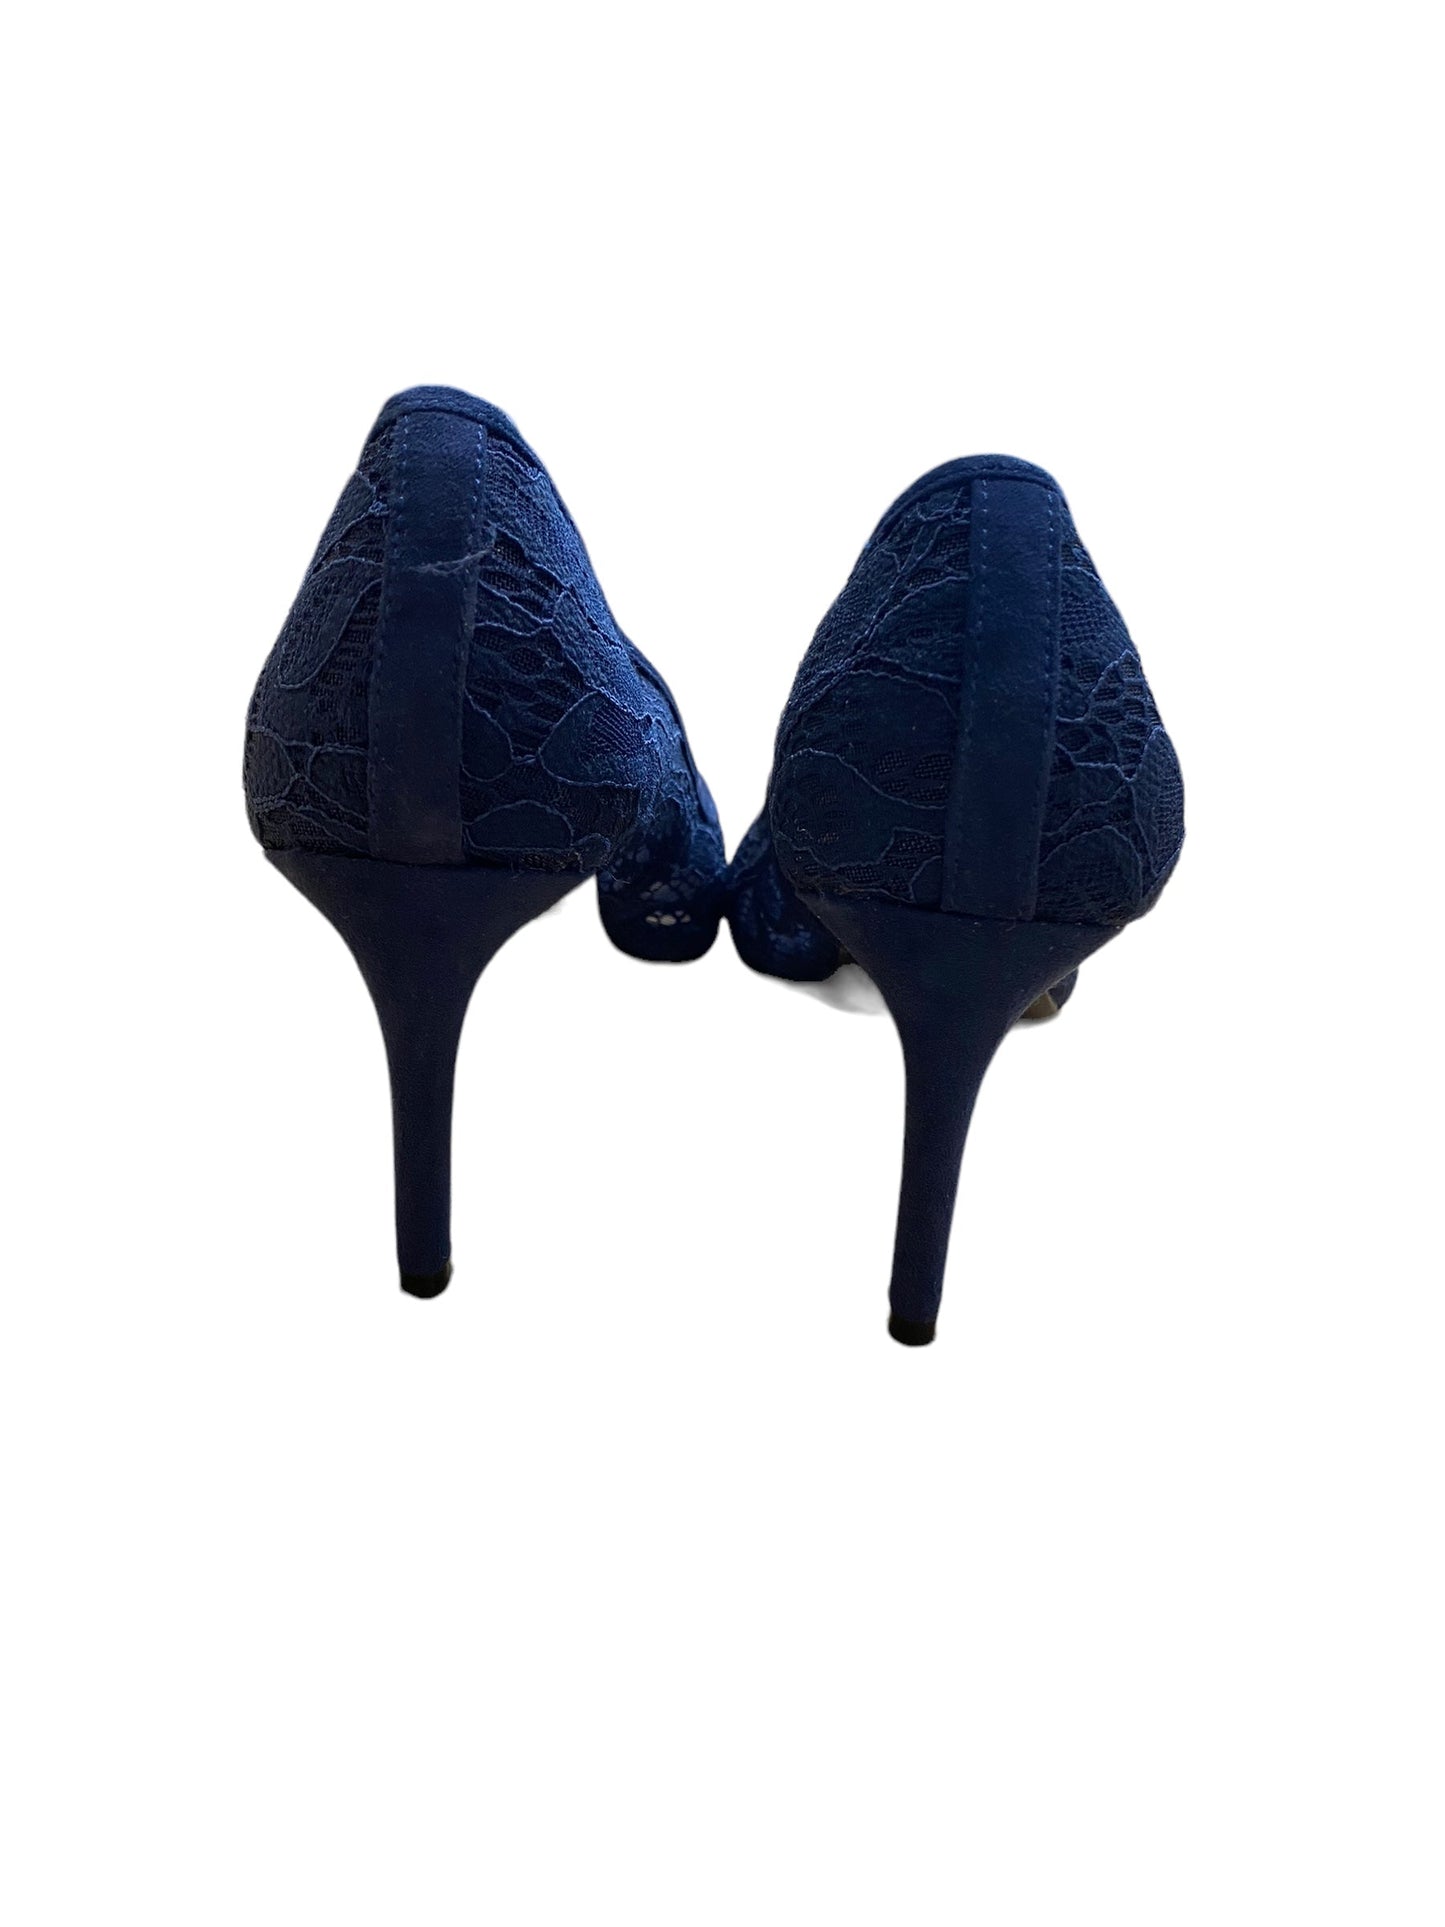 Blue Shoes Heels Stiletto Kelly And Katie, Size 7.5